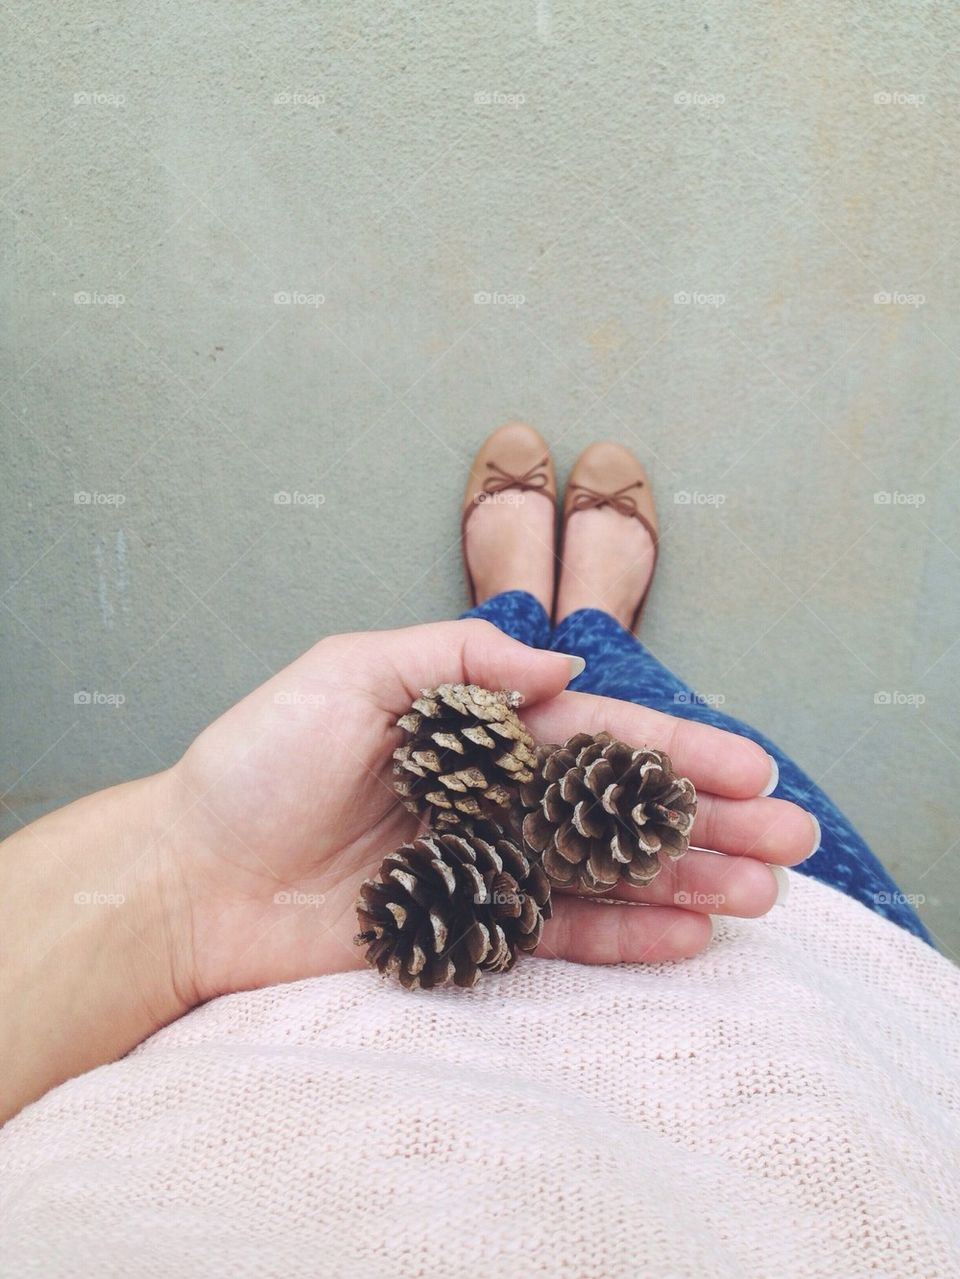 pinecone simplicity outside hand by msanch